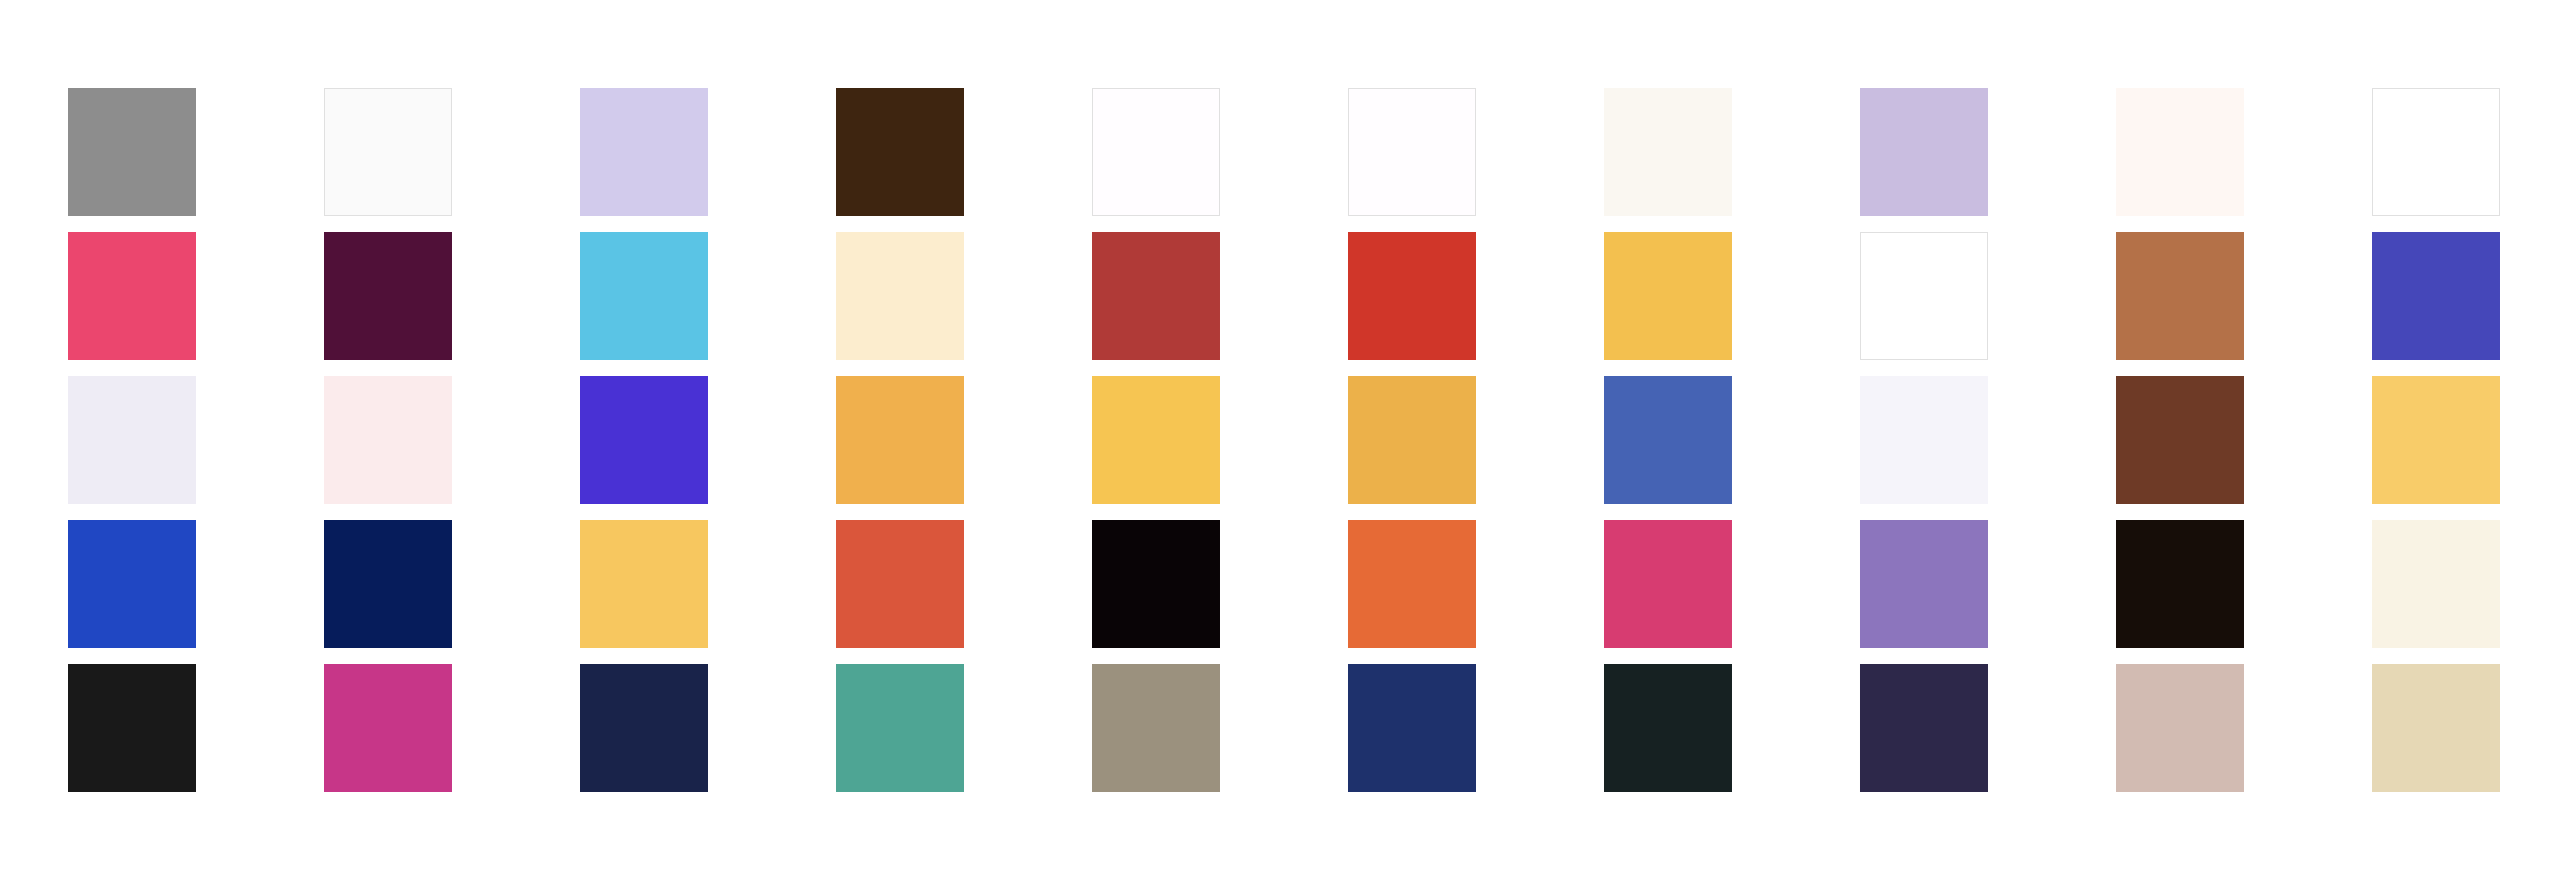 initial palettes